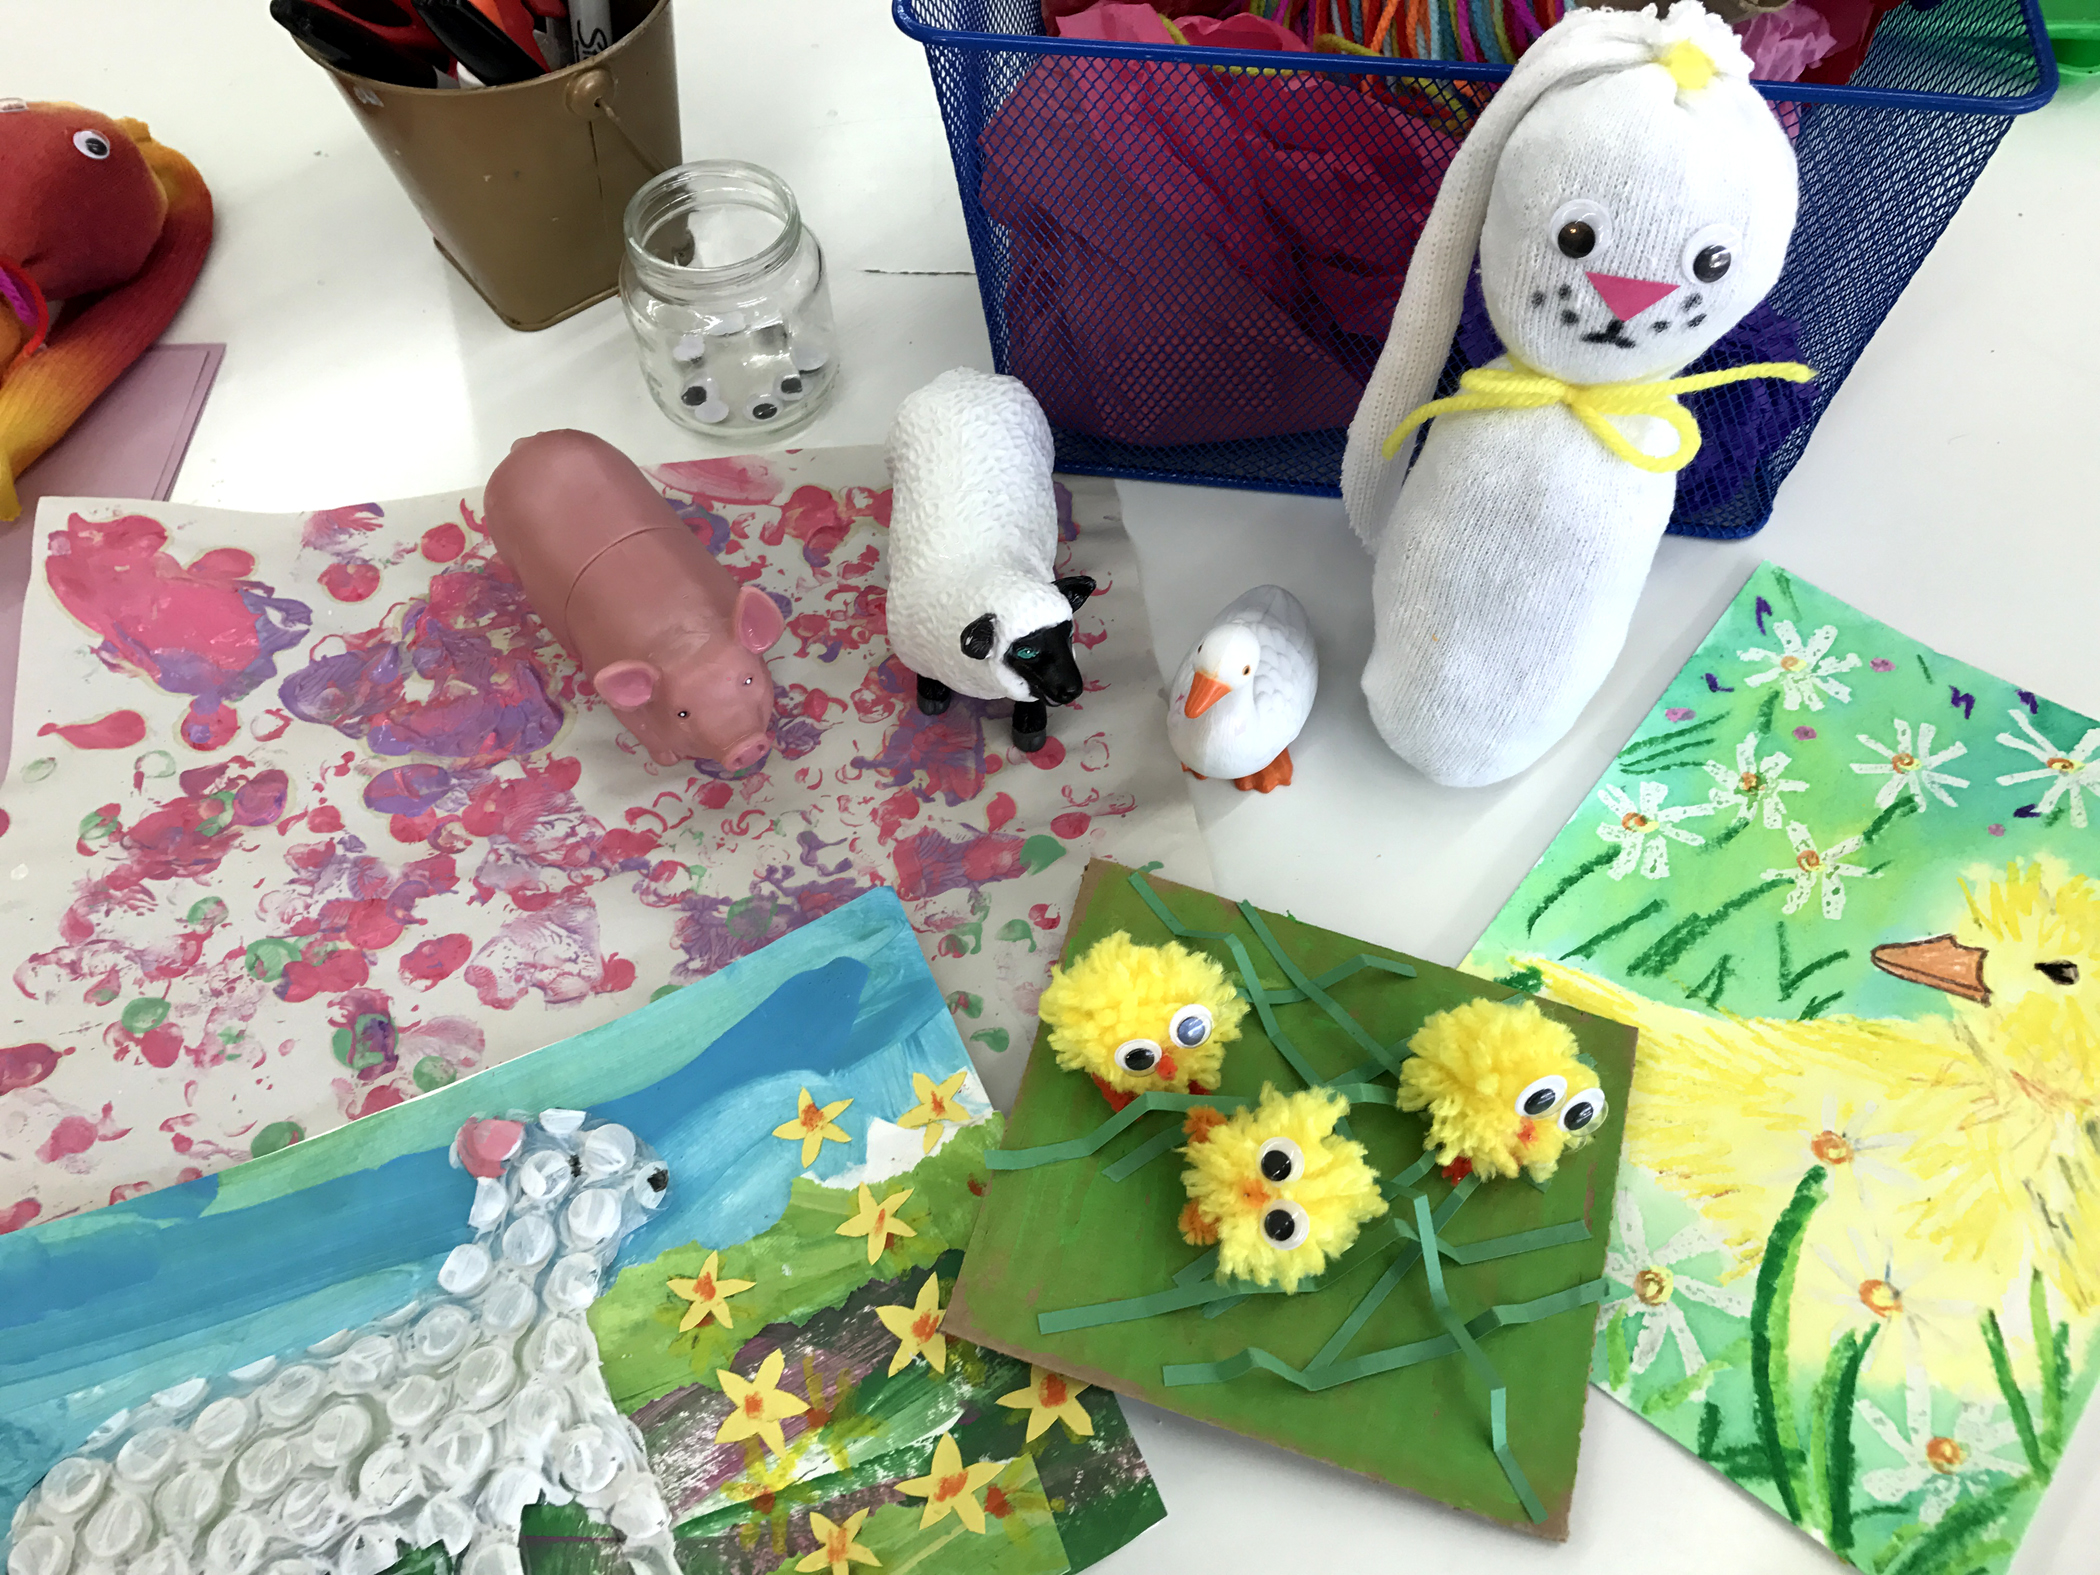 Baby Animal Themed Art Projects For Kids! — The Art Project